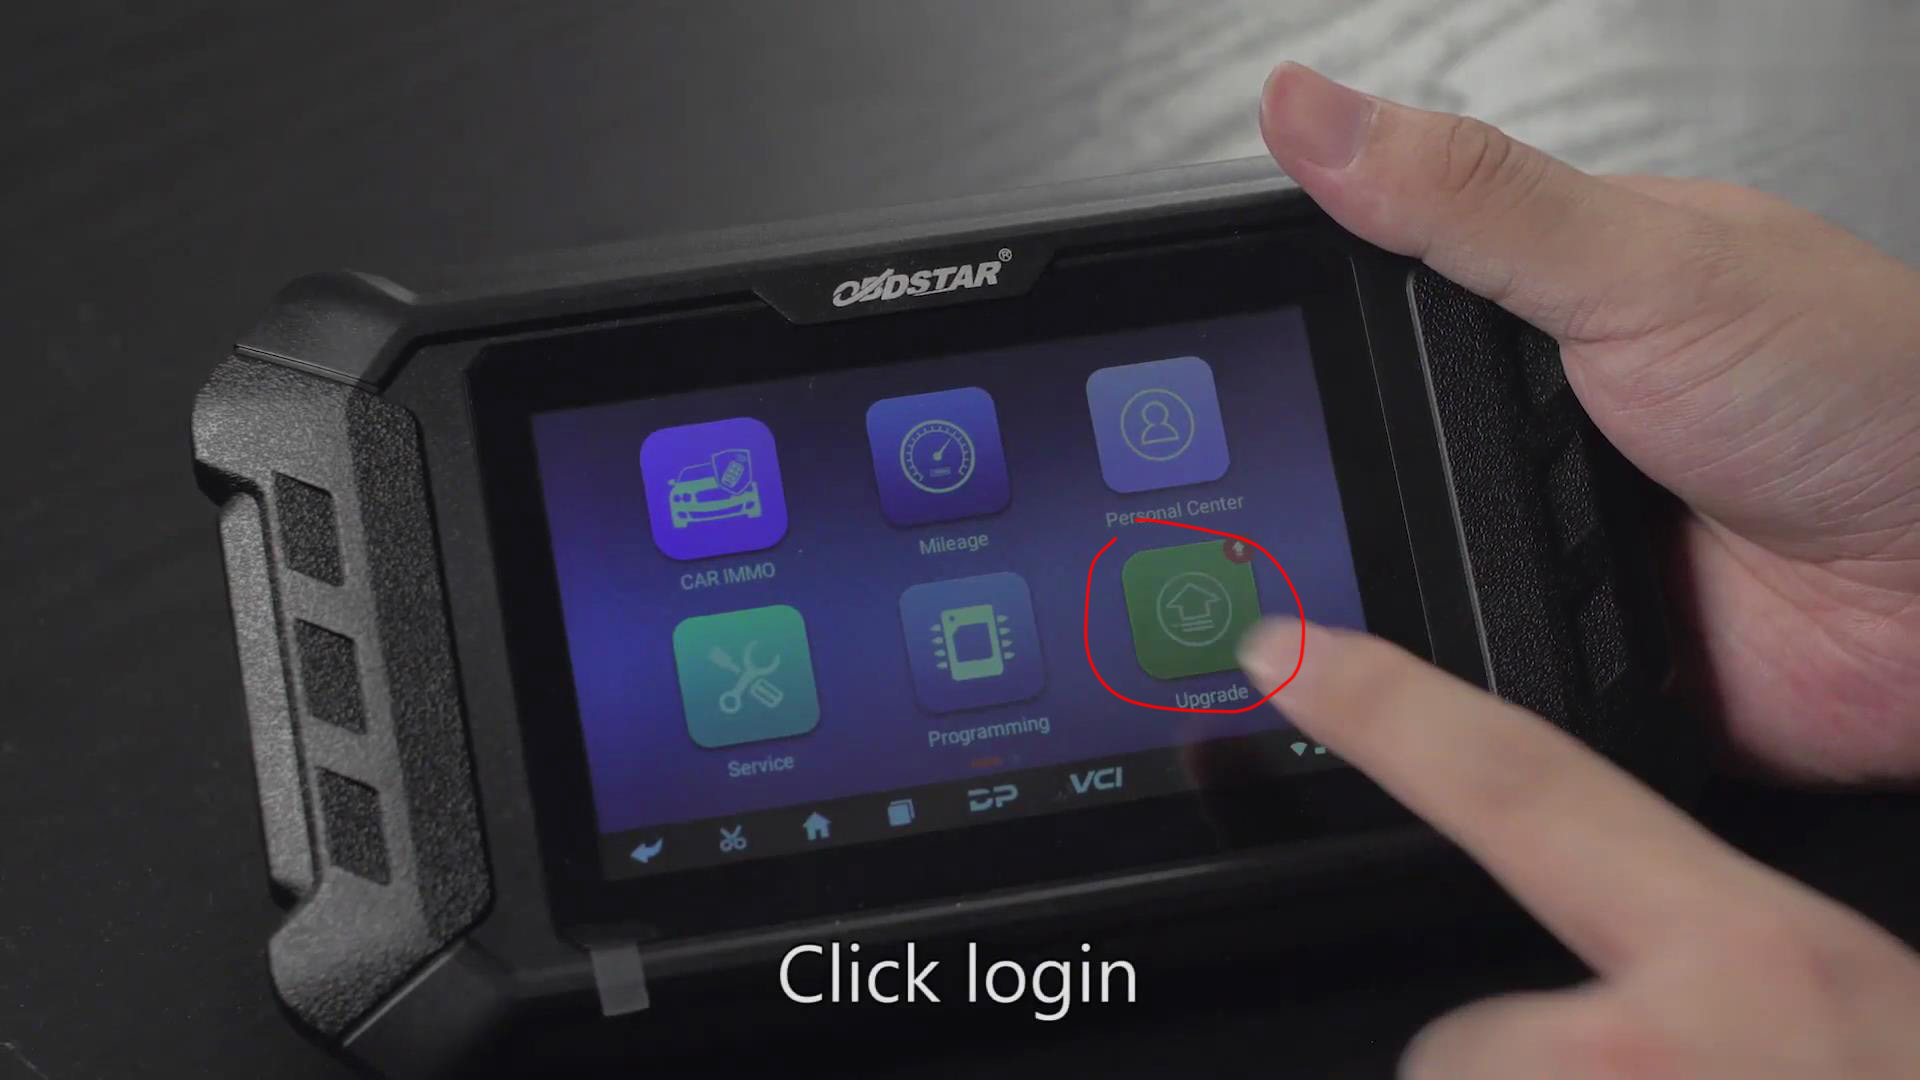 How-to-Register-&-Upgrade-Obdstar-X300-MINI-Scan-Tool-7